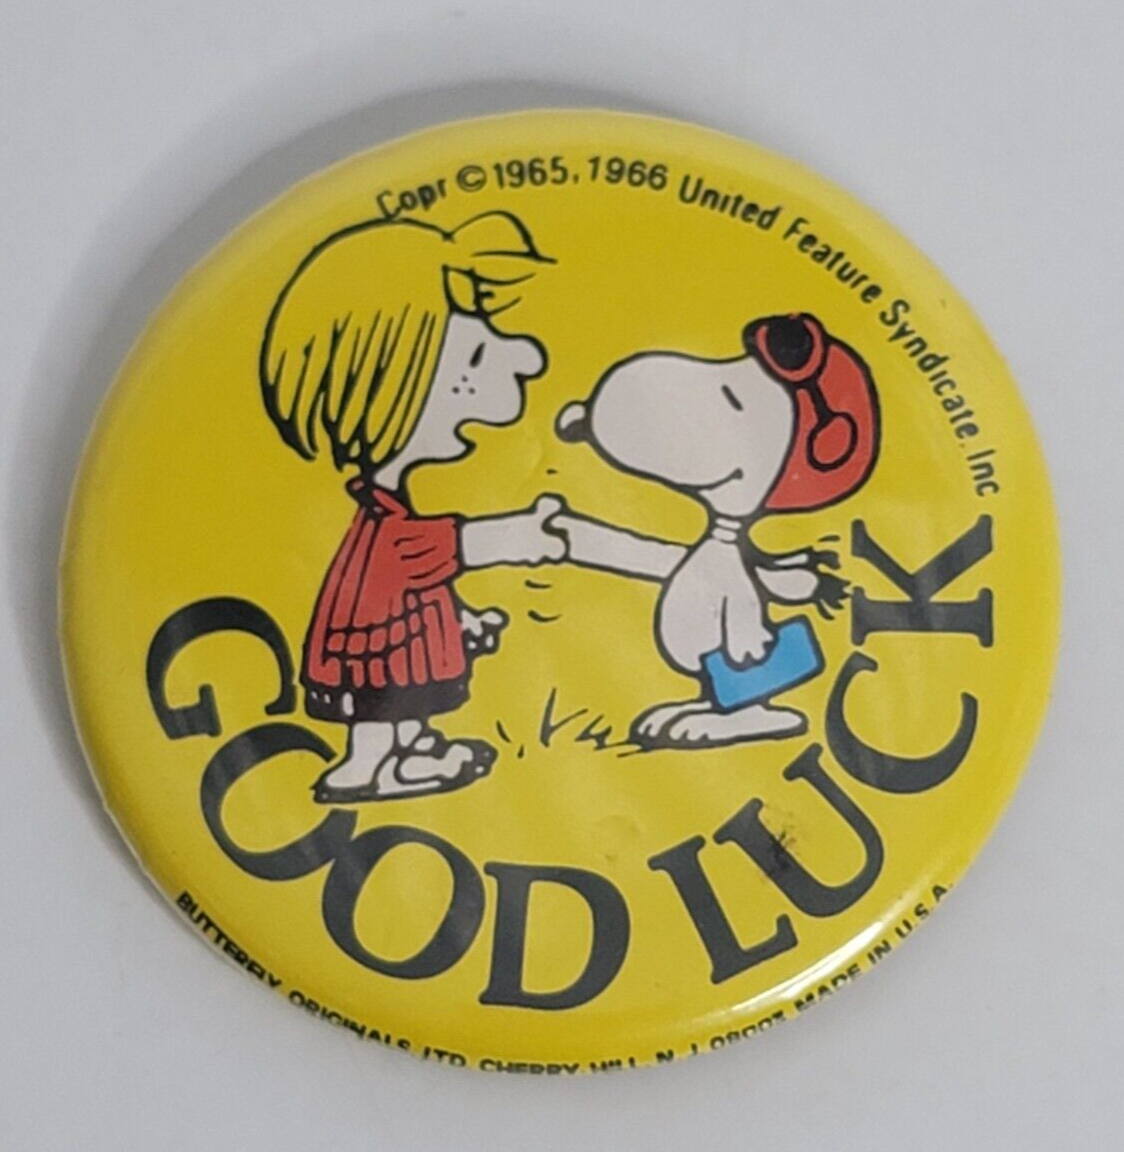 GOOD LUCK 1966 Peanuts Snoopy Charlie Brown Vintage Lapel Button Pin Back Badge - $19.99